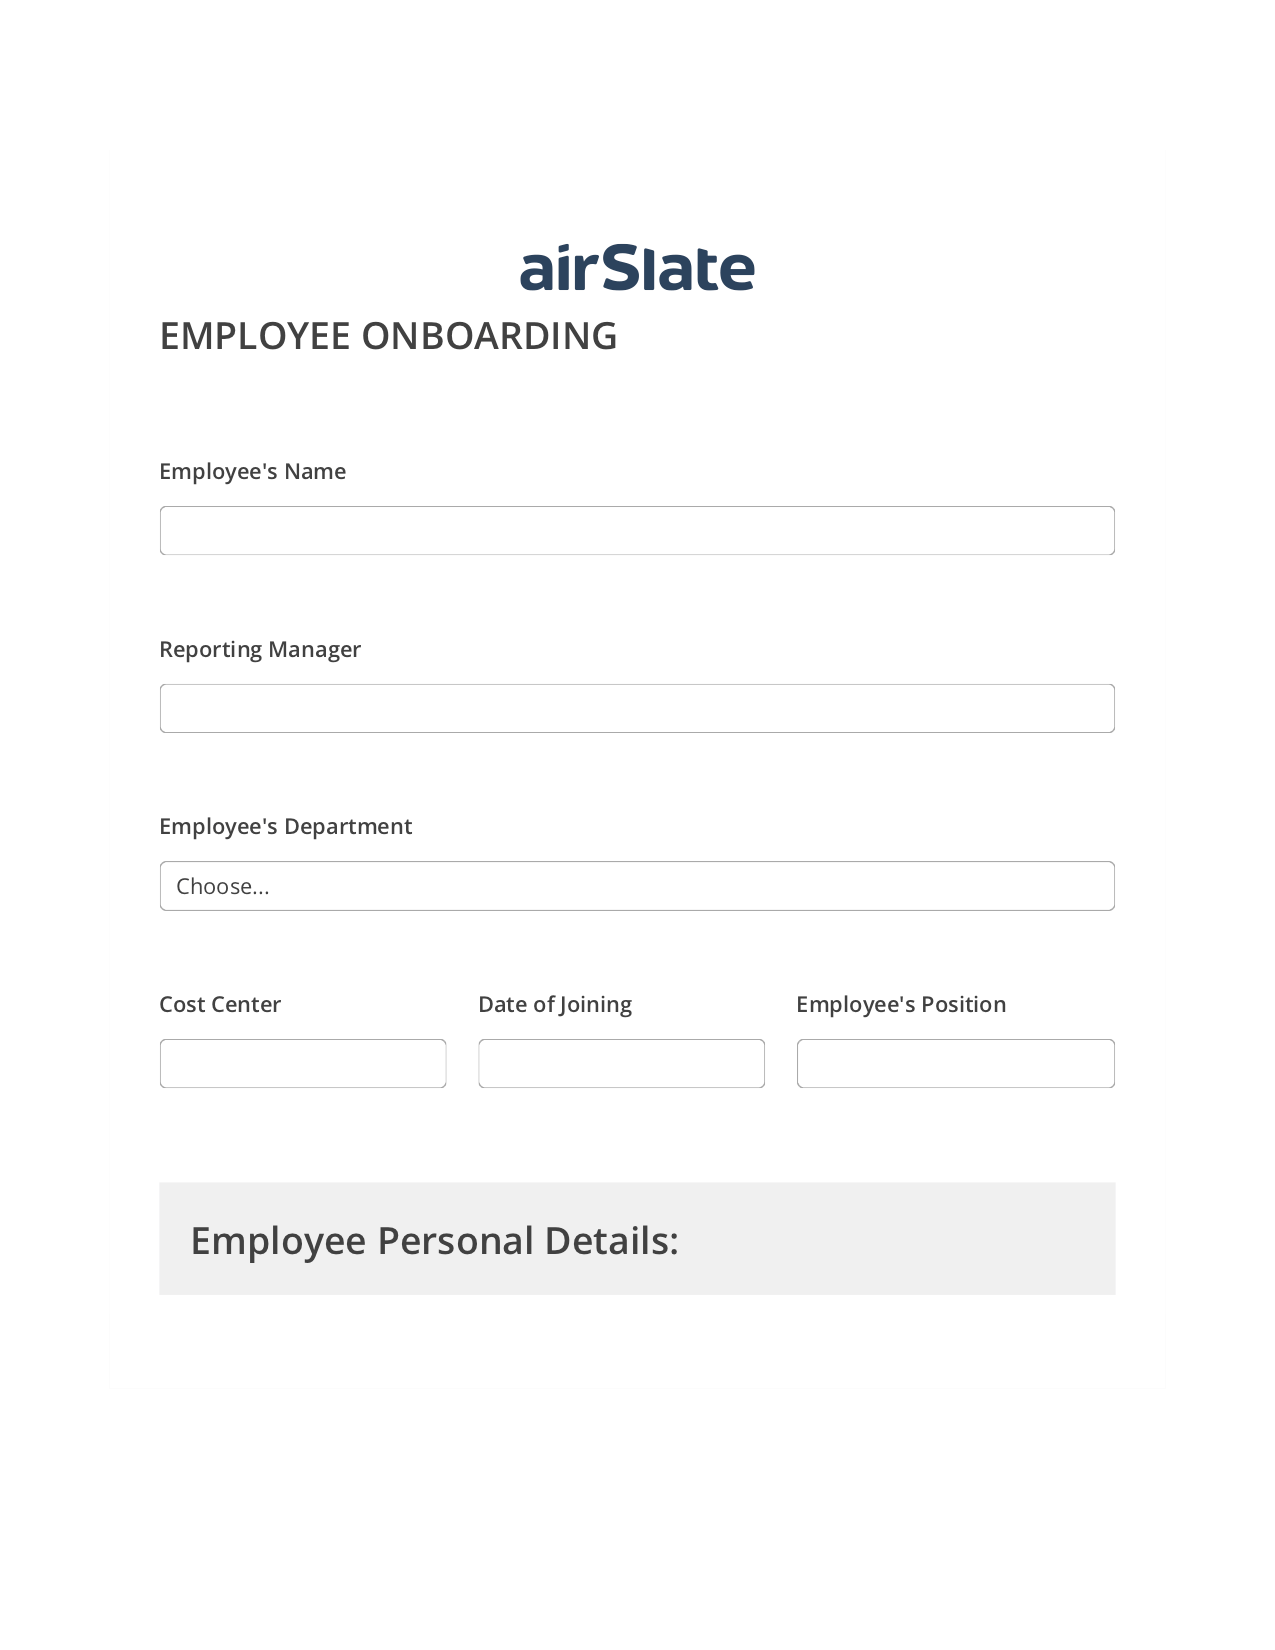 Employee Onboarding Workflow Pre-fill Slate from MS Dynamics 365 record, Remove Tags From Slate Bot, Export to MySQL Bot